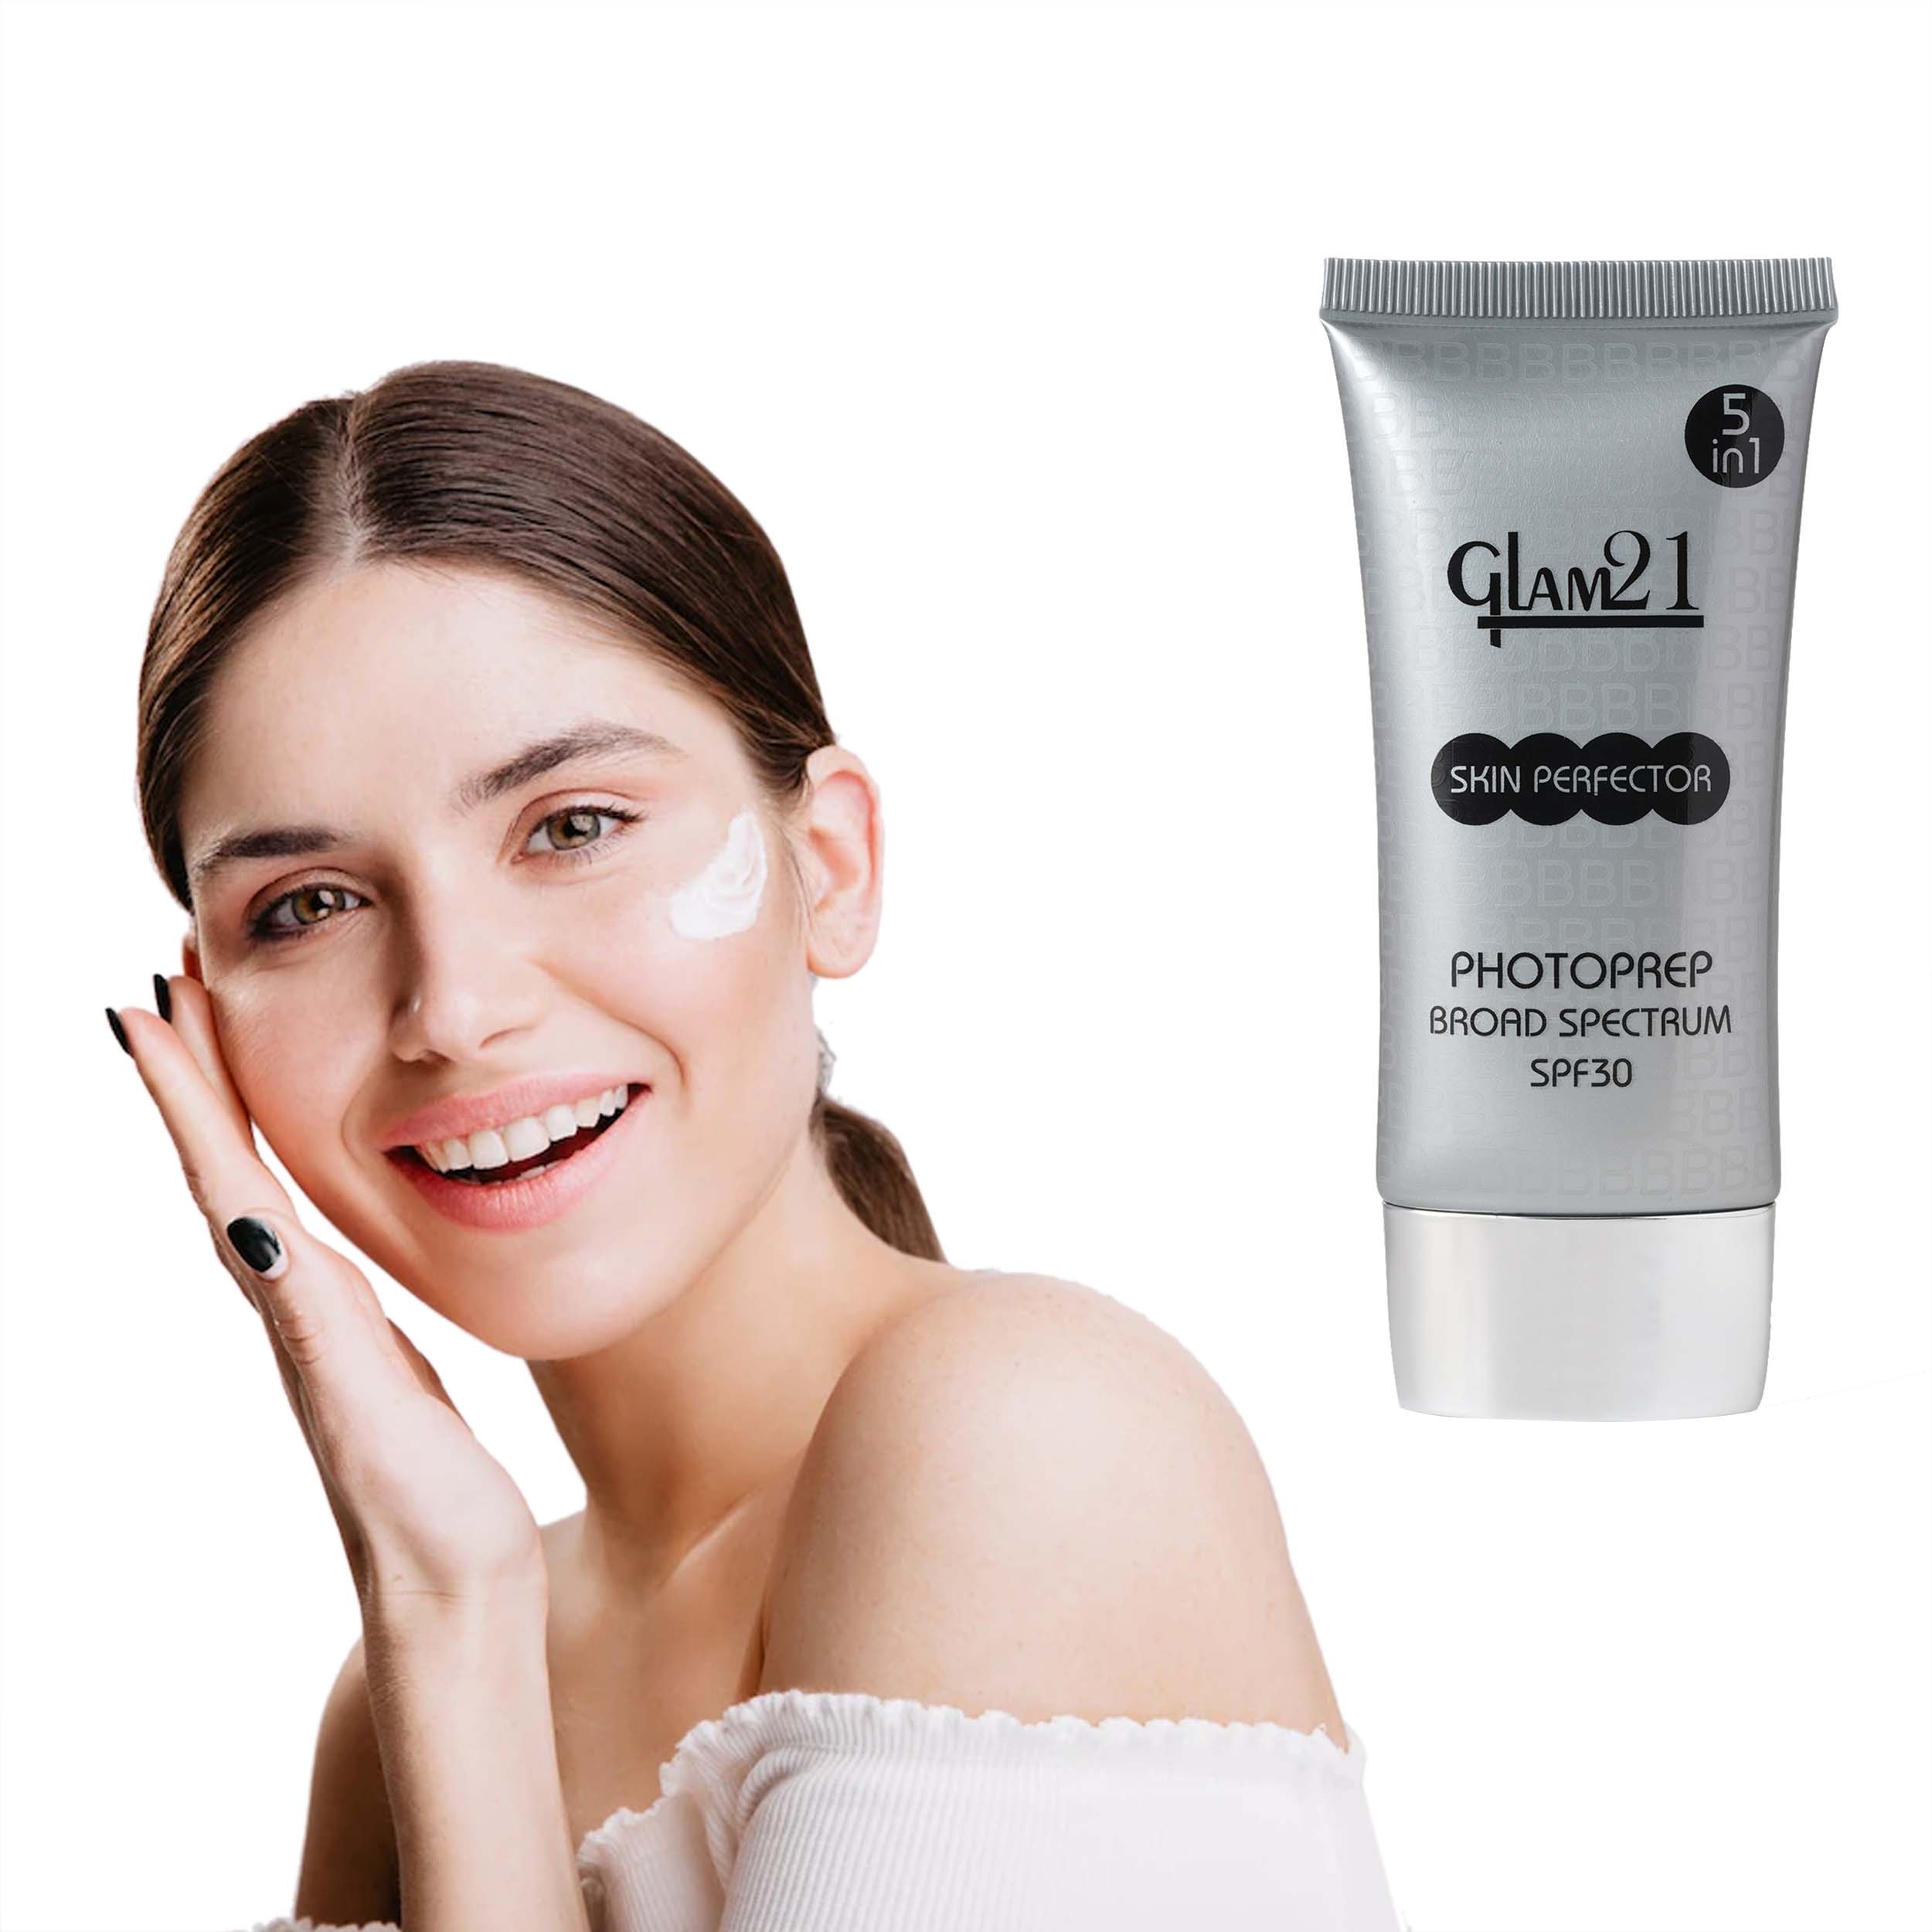 Glam21 Skin Perfector Cream with SPF30 UV Protection with Lightweight Satin Formulation Foundation, 50g (Light Natural-01)